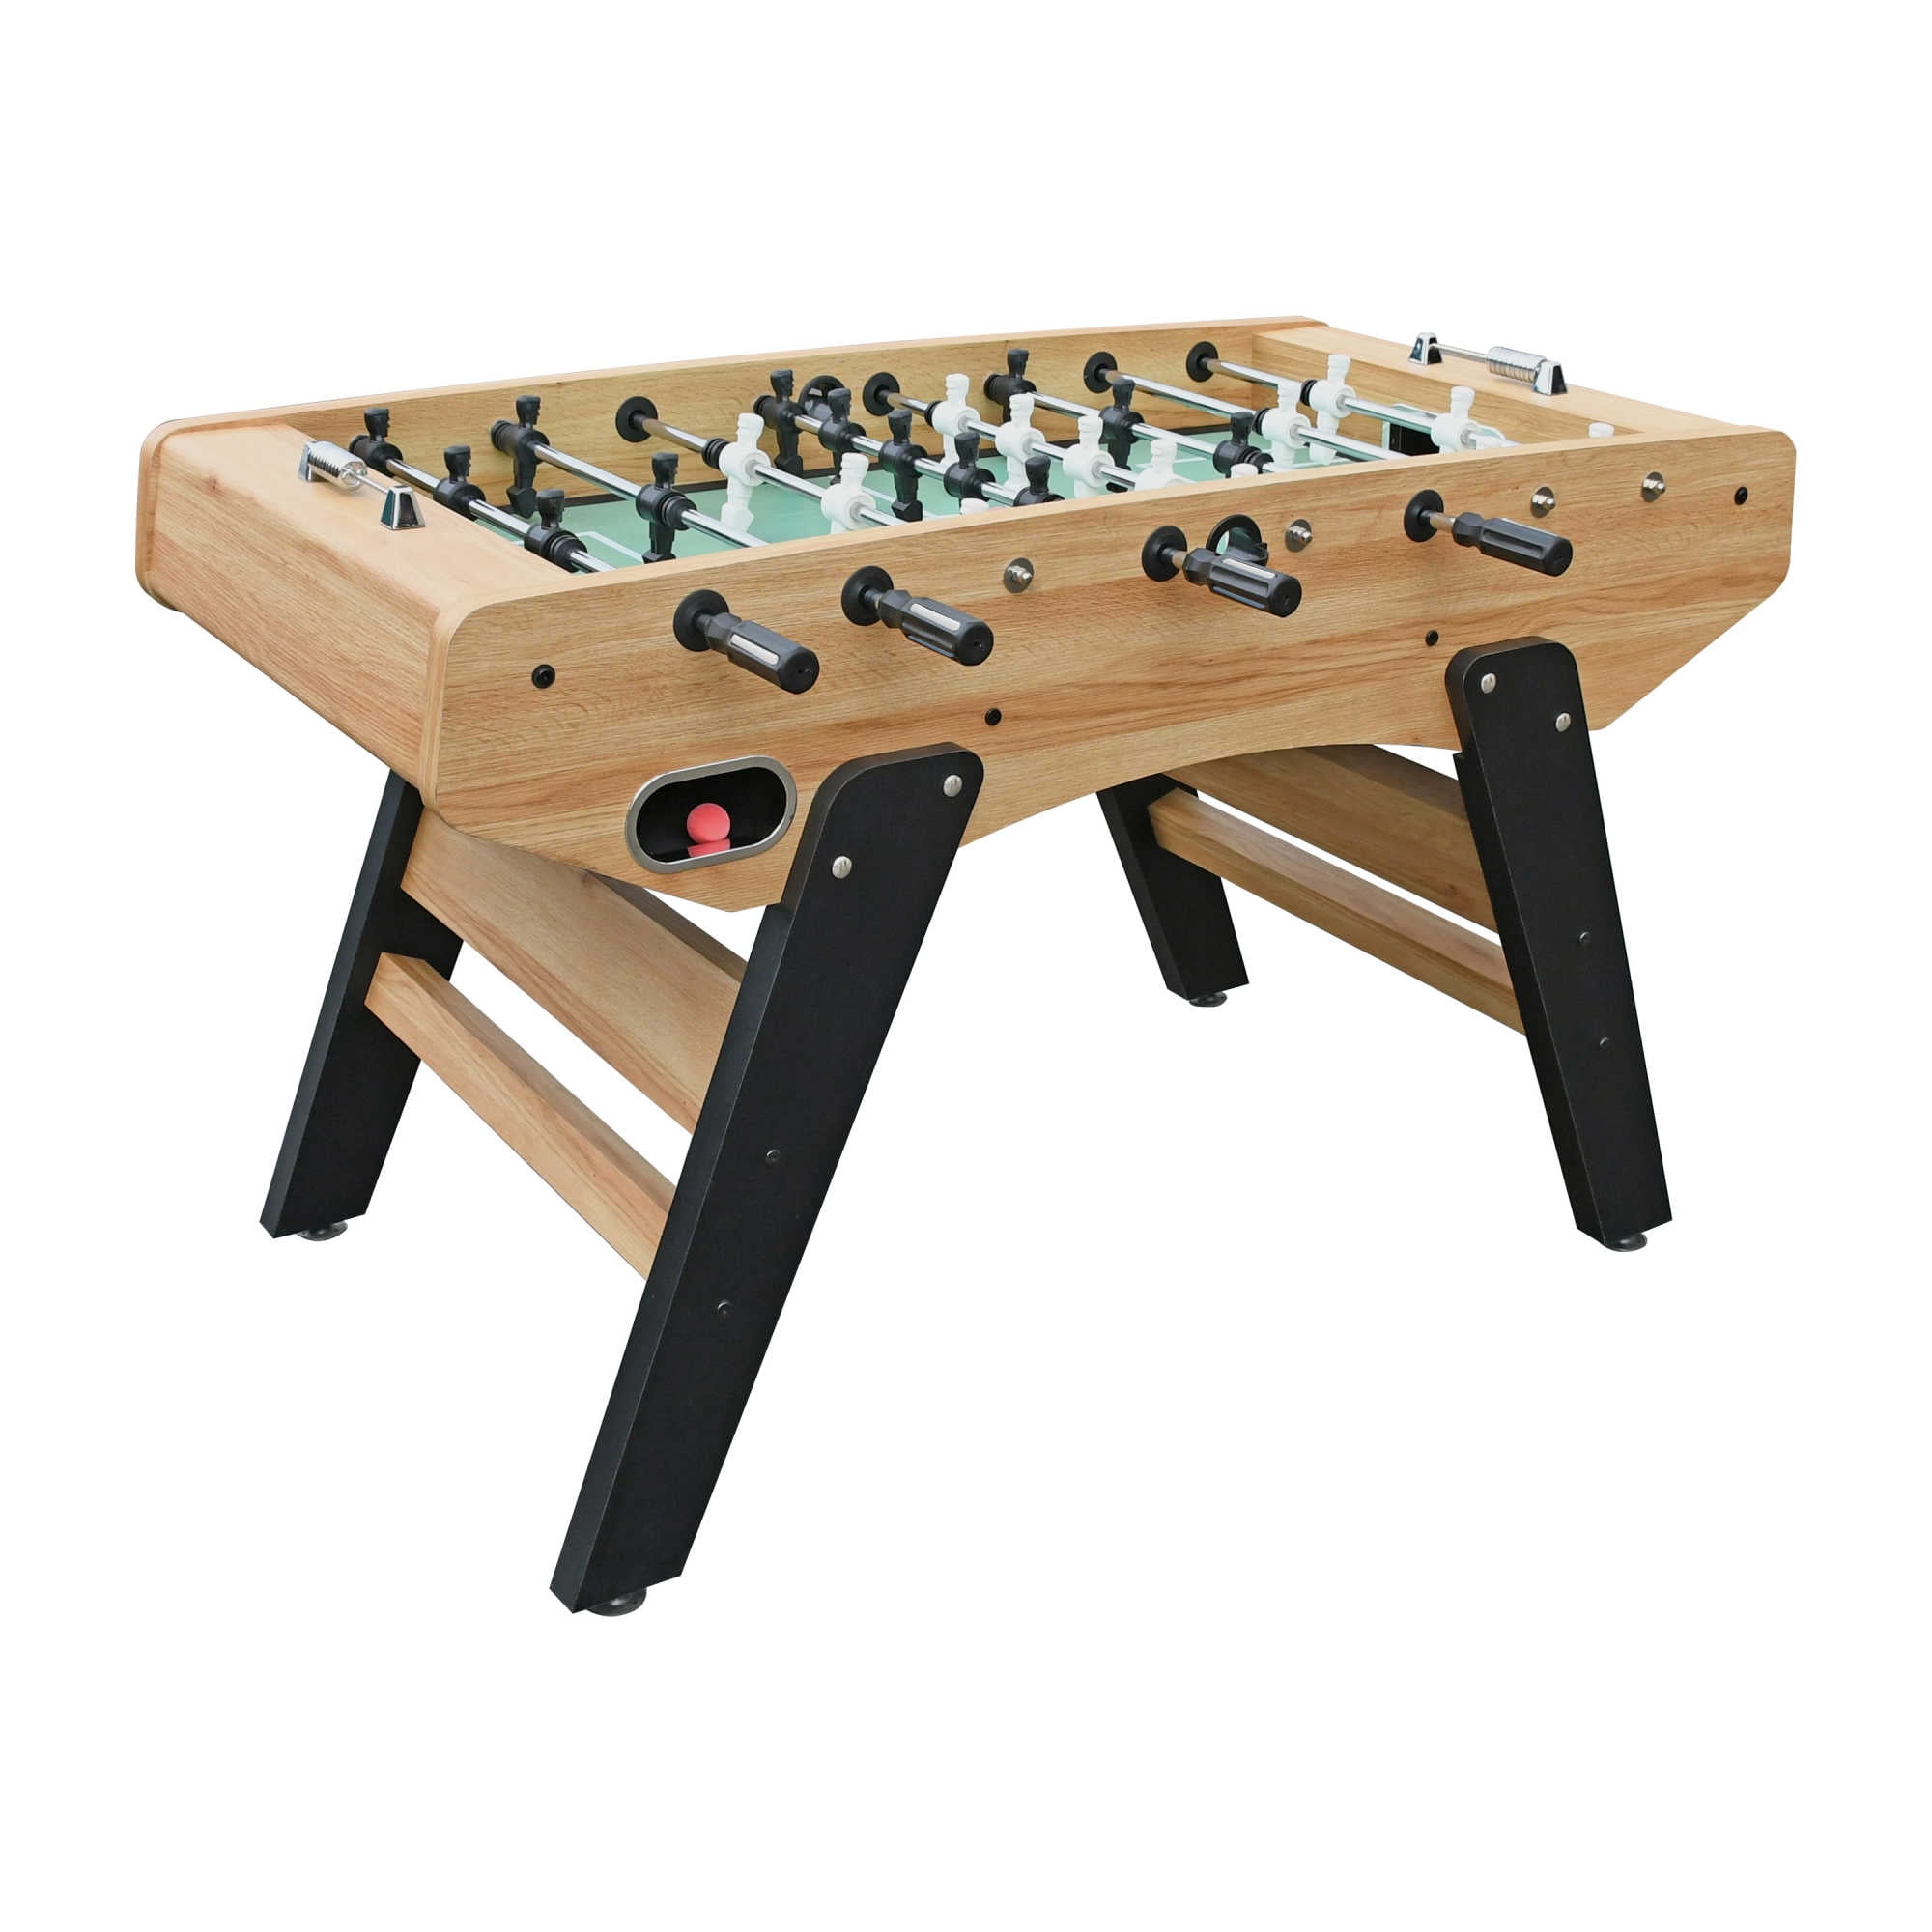 Details about   36mm Foosball Table Soccer Ball Fussball Roughened Surface Football Indoor Game 